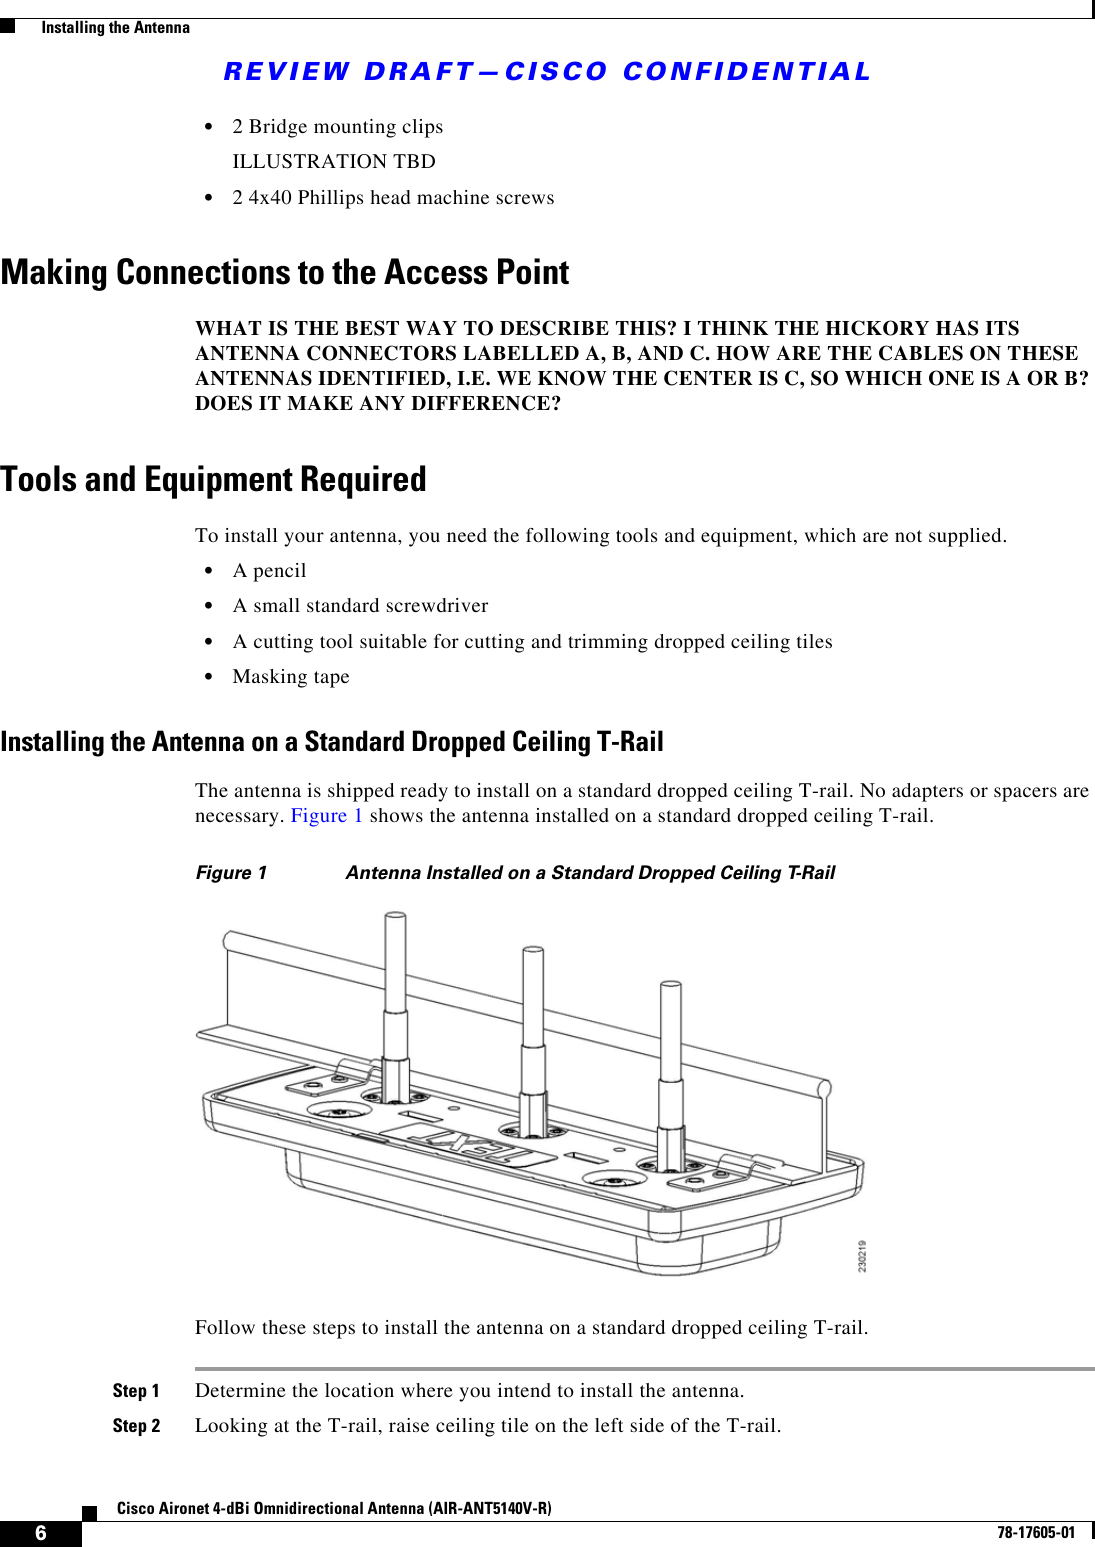 REVIEW DRAFT—CISCO CONFIDENTIAL6Cisco Aironet 4-dBi Omnidirectional Antenna (AIR-ANT5140V-R)78-17605-01  Installing the Antenna•2 Bridge mounting clipsILLUSTRATION TBD•2 4x40 Phillips head machine screwsMaking Connections to the Access PointWHAT IS THE BEST WAY TO DESCRIBE THIS? I THINK THE HICKORY HAS ITS ANTENNA CONNECTORS LABELLED A, B, AND C. HOW ARE THE CABLES ON THESE ANTENNAS IDENTIFIED, I.E. WE KNOW THE CENTER IS C, SO WHICH ONE IS A OR B? DOES IT MAKE ANY DIFFERENCE?Tools and Equipment RequiredTo install your antenna, you need the following tools and equipment, which are not supplied.•A pencil•A small standard screwdriver•A cutting tool suitable for cutting and trimming dropped ceiling tiles•Masking tapeInstalling the Antenna on a Standard Dropped Ceiling T-RailThe antenna is shipped ready to install on a standard dropped ceiling T-rail. No adapters or spacers are necessary. Figure 1 shows the antenna installed on a standard dropped ceiling T-rail.Figure 1 Antenna Installed on a Standard Dropped Ceiling T-RailFollow these steps to install the antenna on a standard dropped ceiling T-rail.Step 1 Determine the location where you intend to install the antenna.Step 2 Looking at the T-rail, raise ceiling tile on the left side of the T-rail.